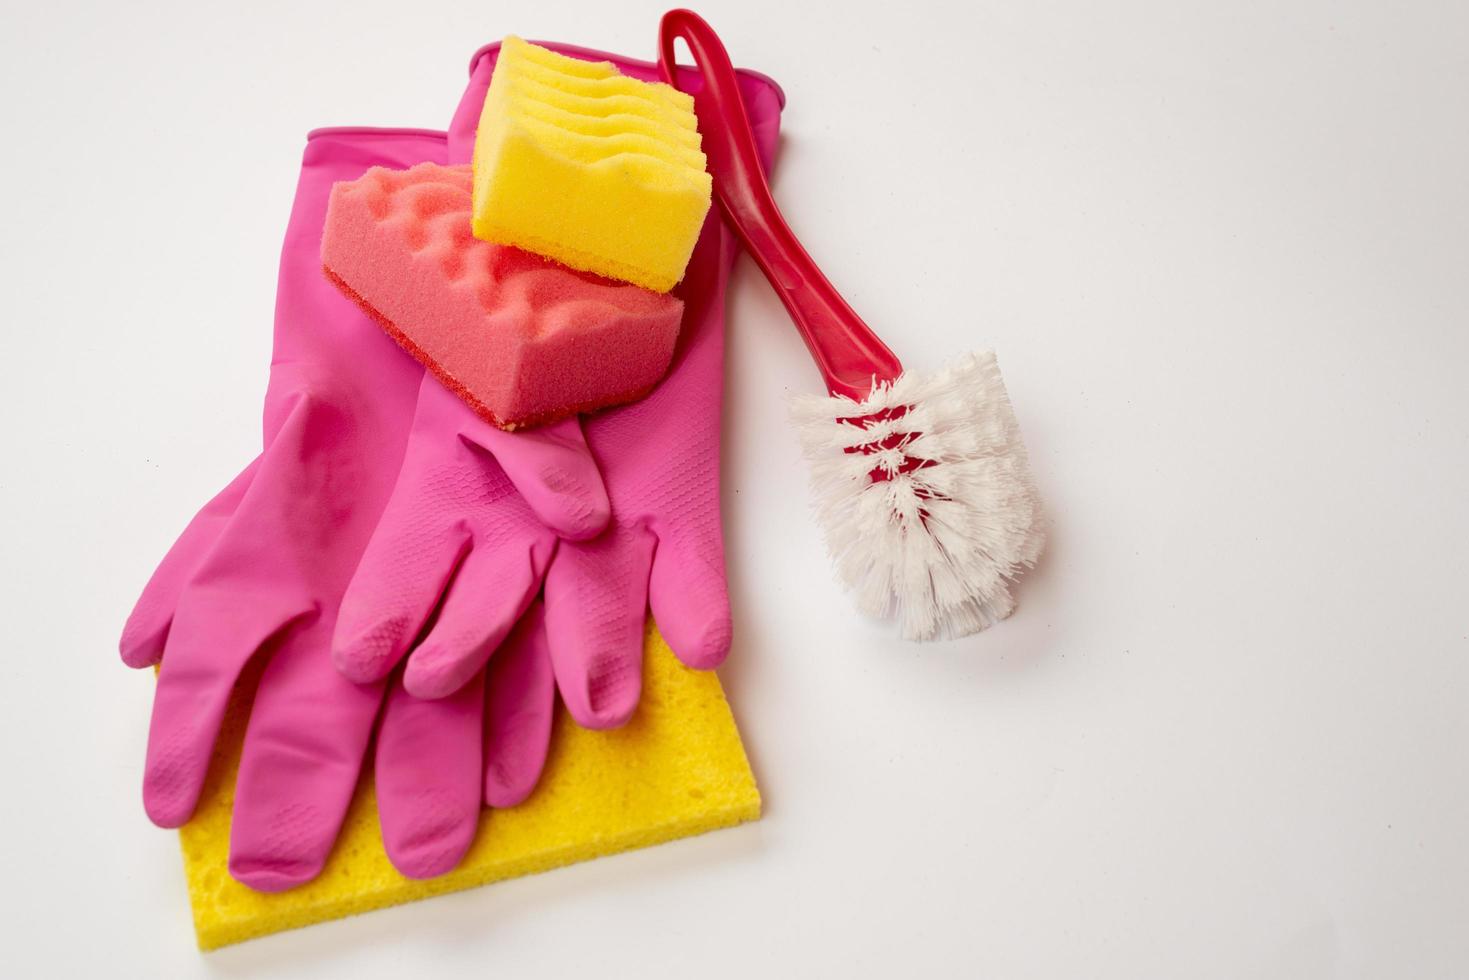 Sponge, household brush, latex gloves lying on a white background. Concept cleaning service photo